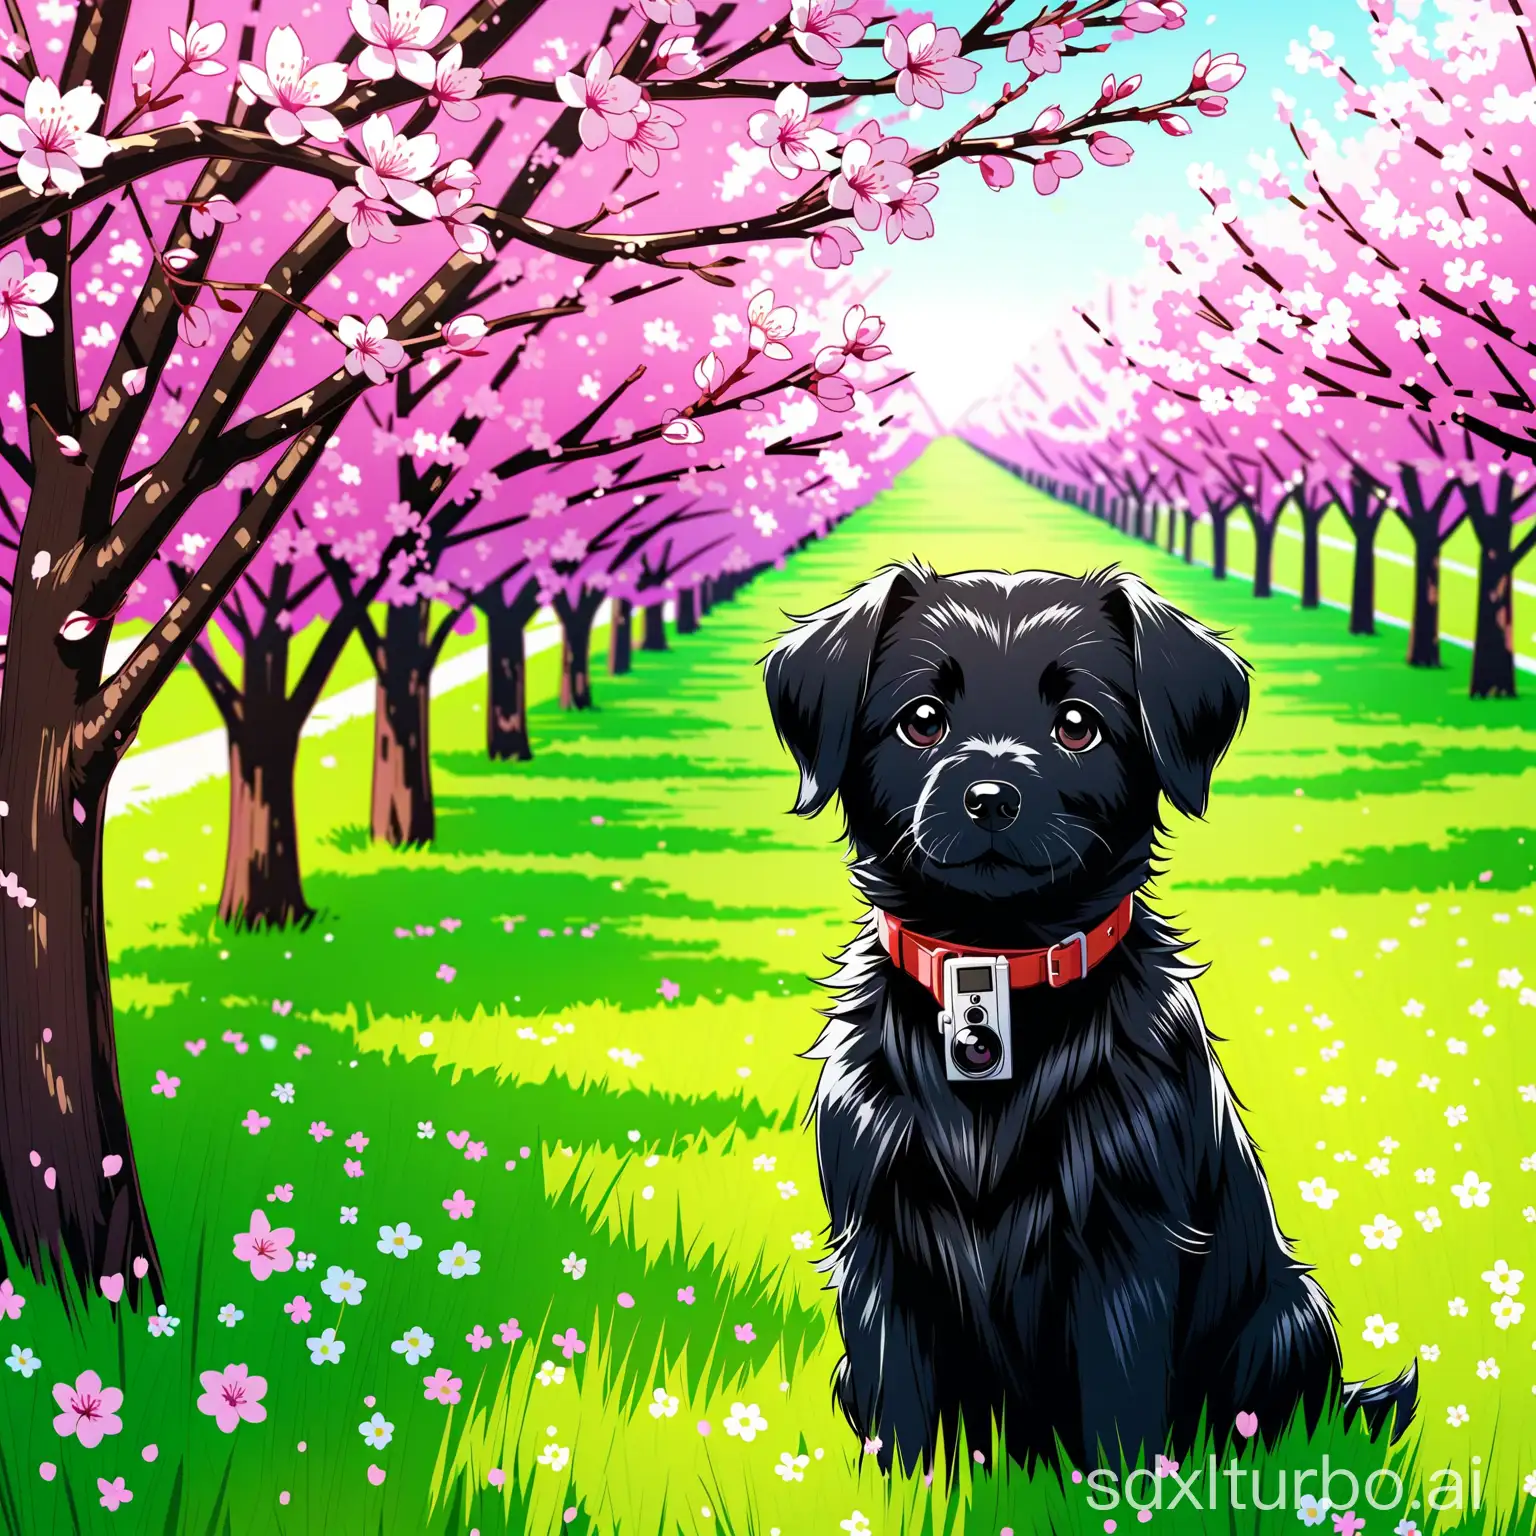 Playful-Little-Black-Dog-in-a-Spring-Orchard-with-Fruit-Trees